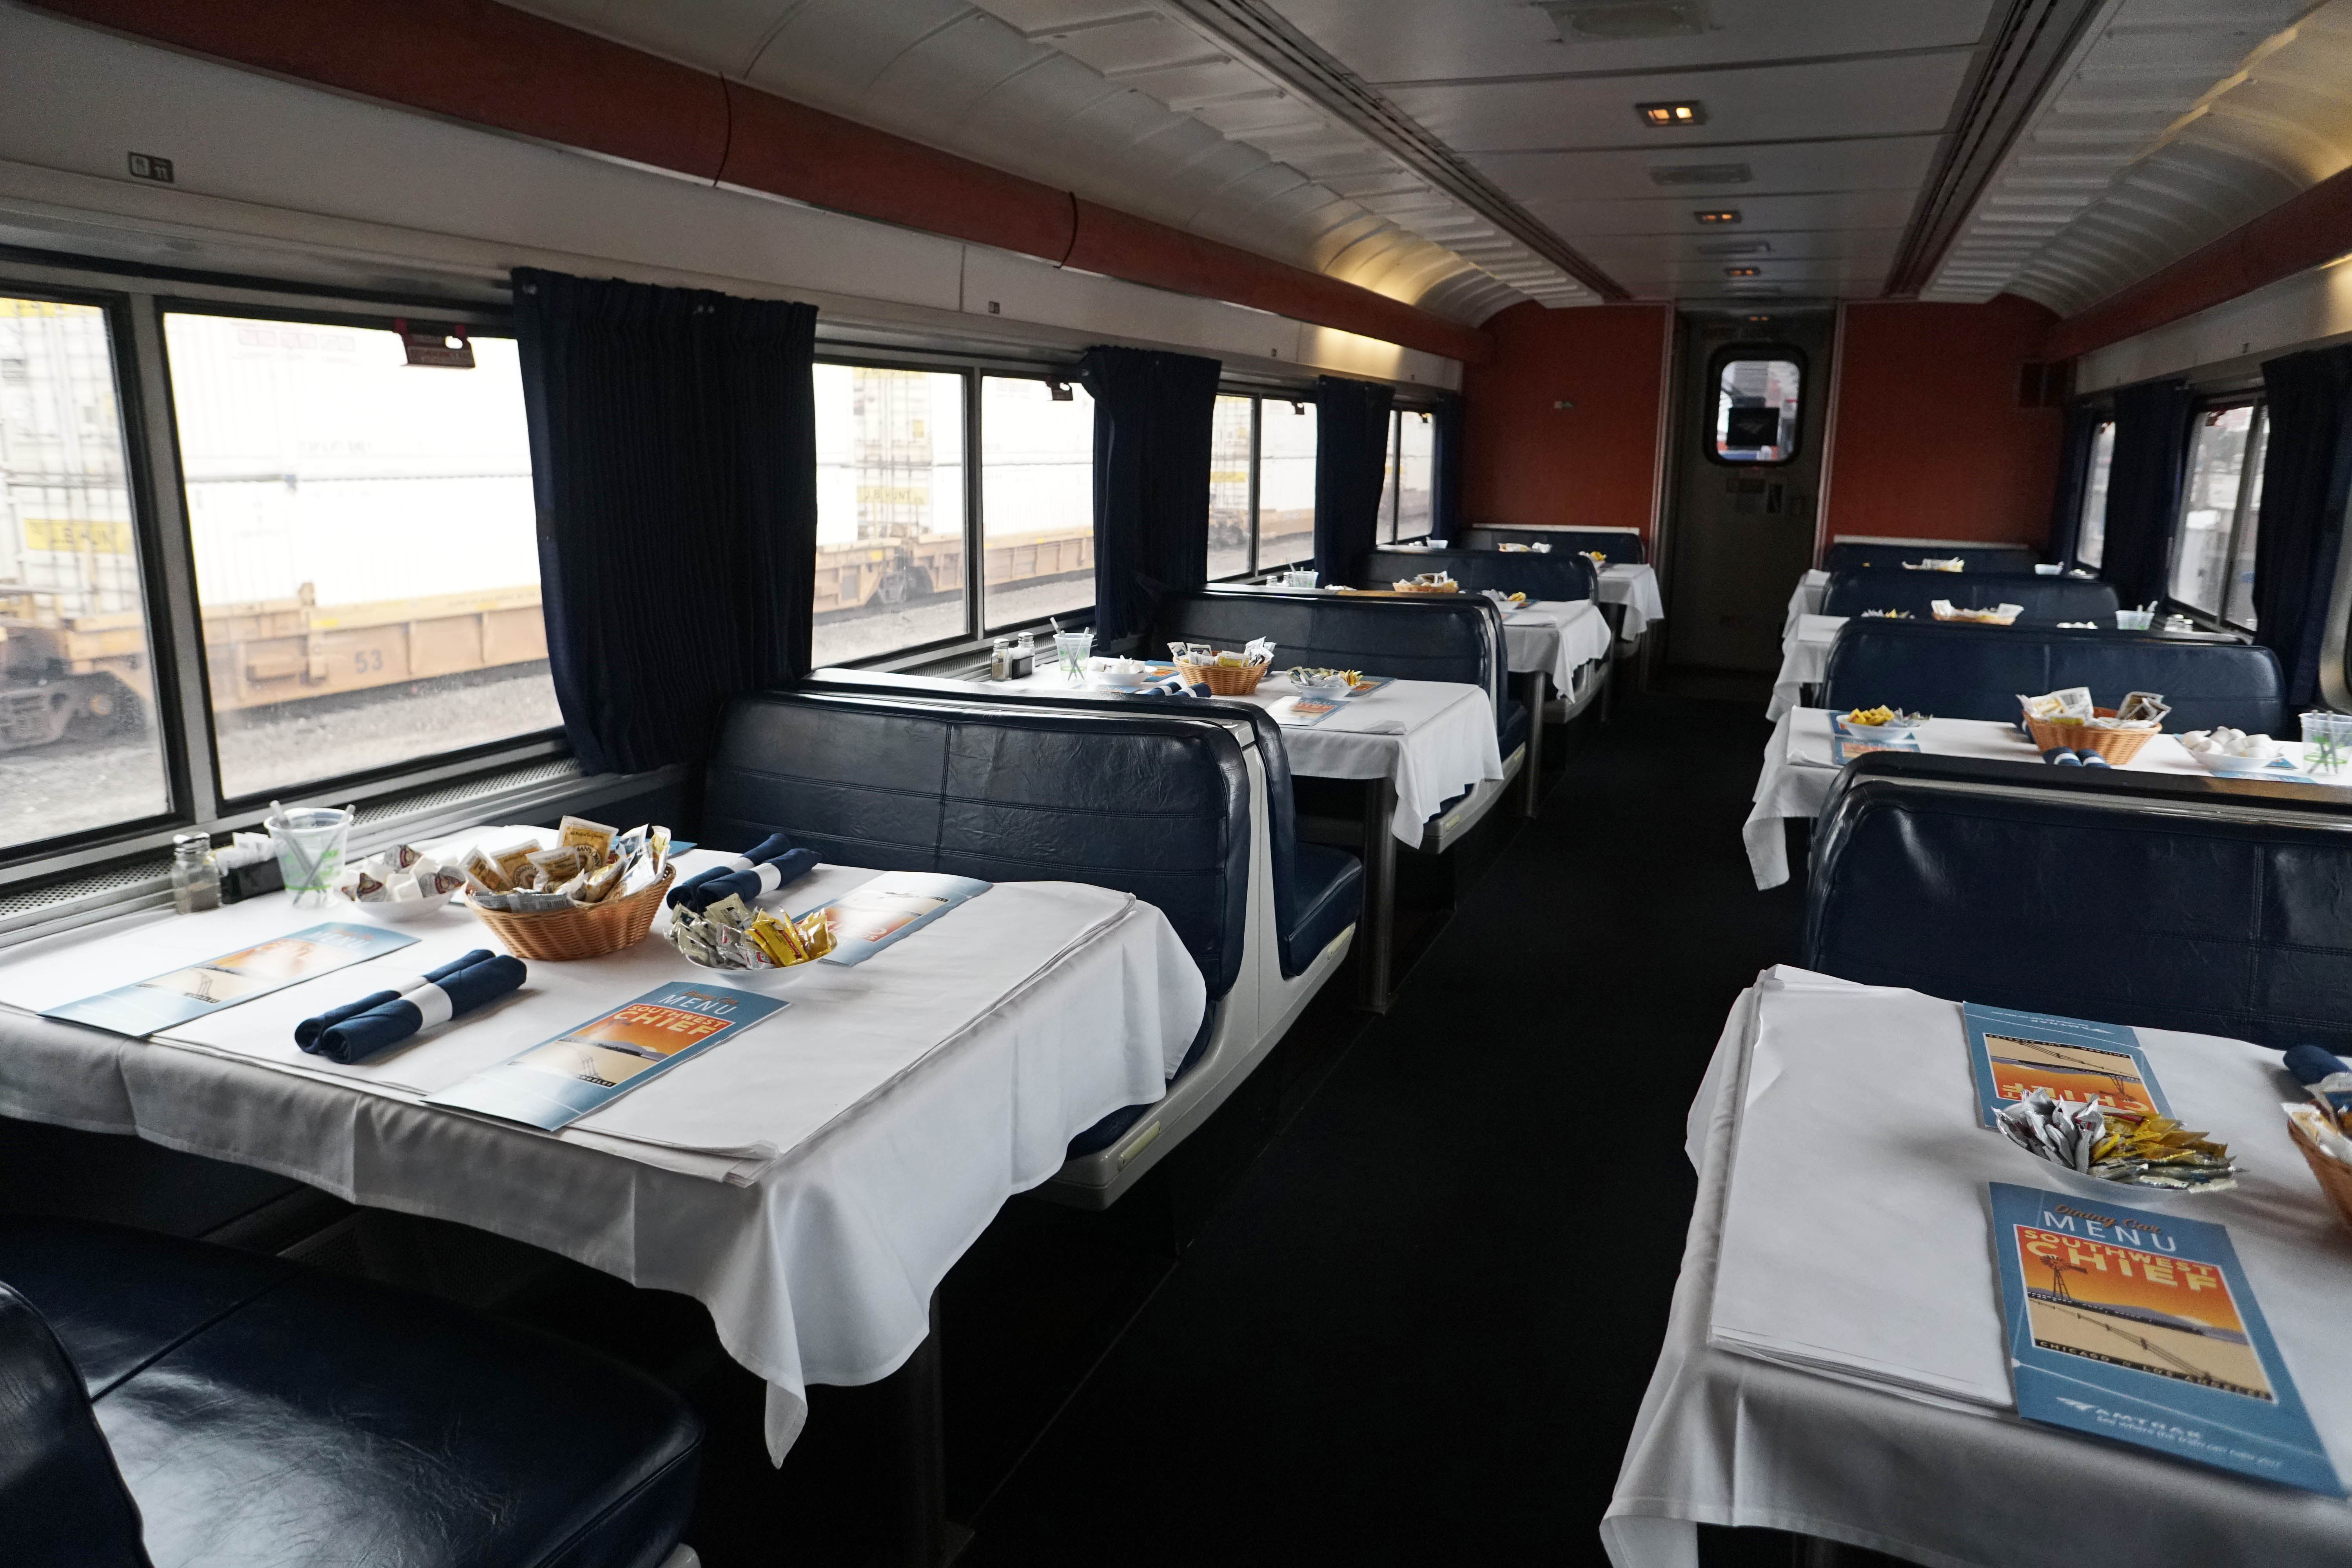 Dining Car set up ready for a meal